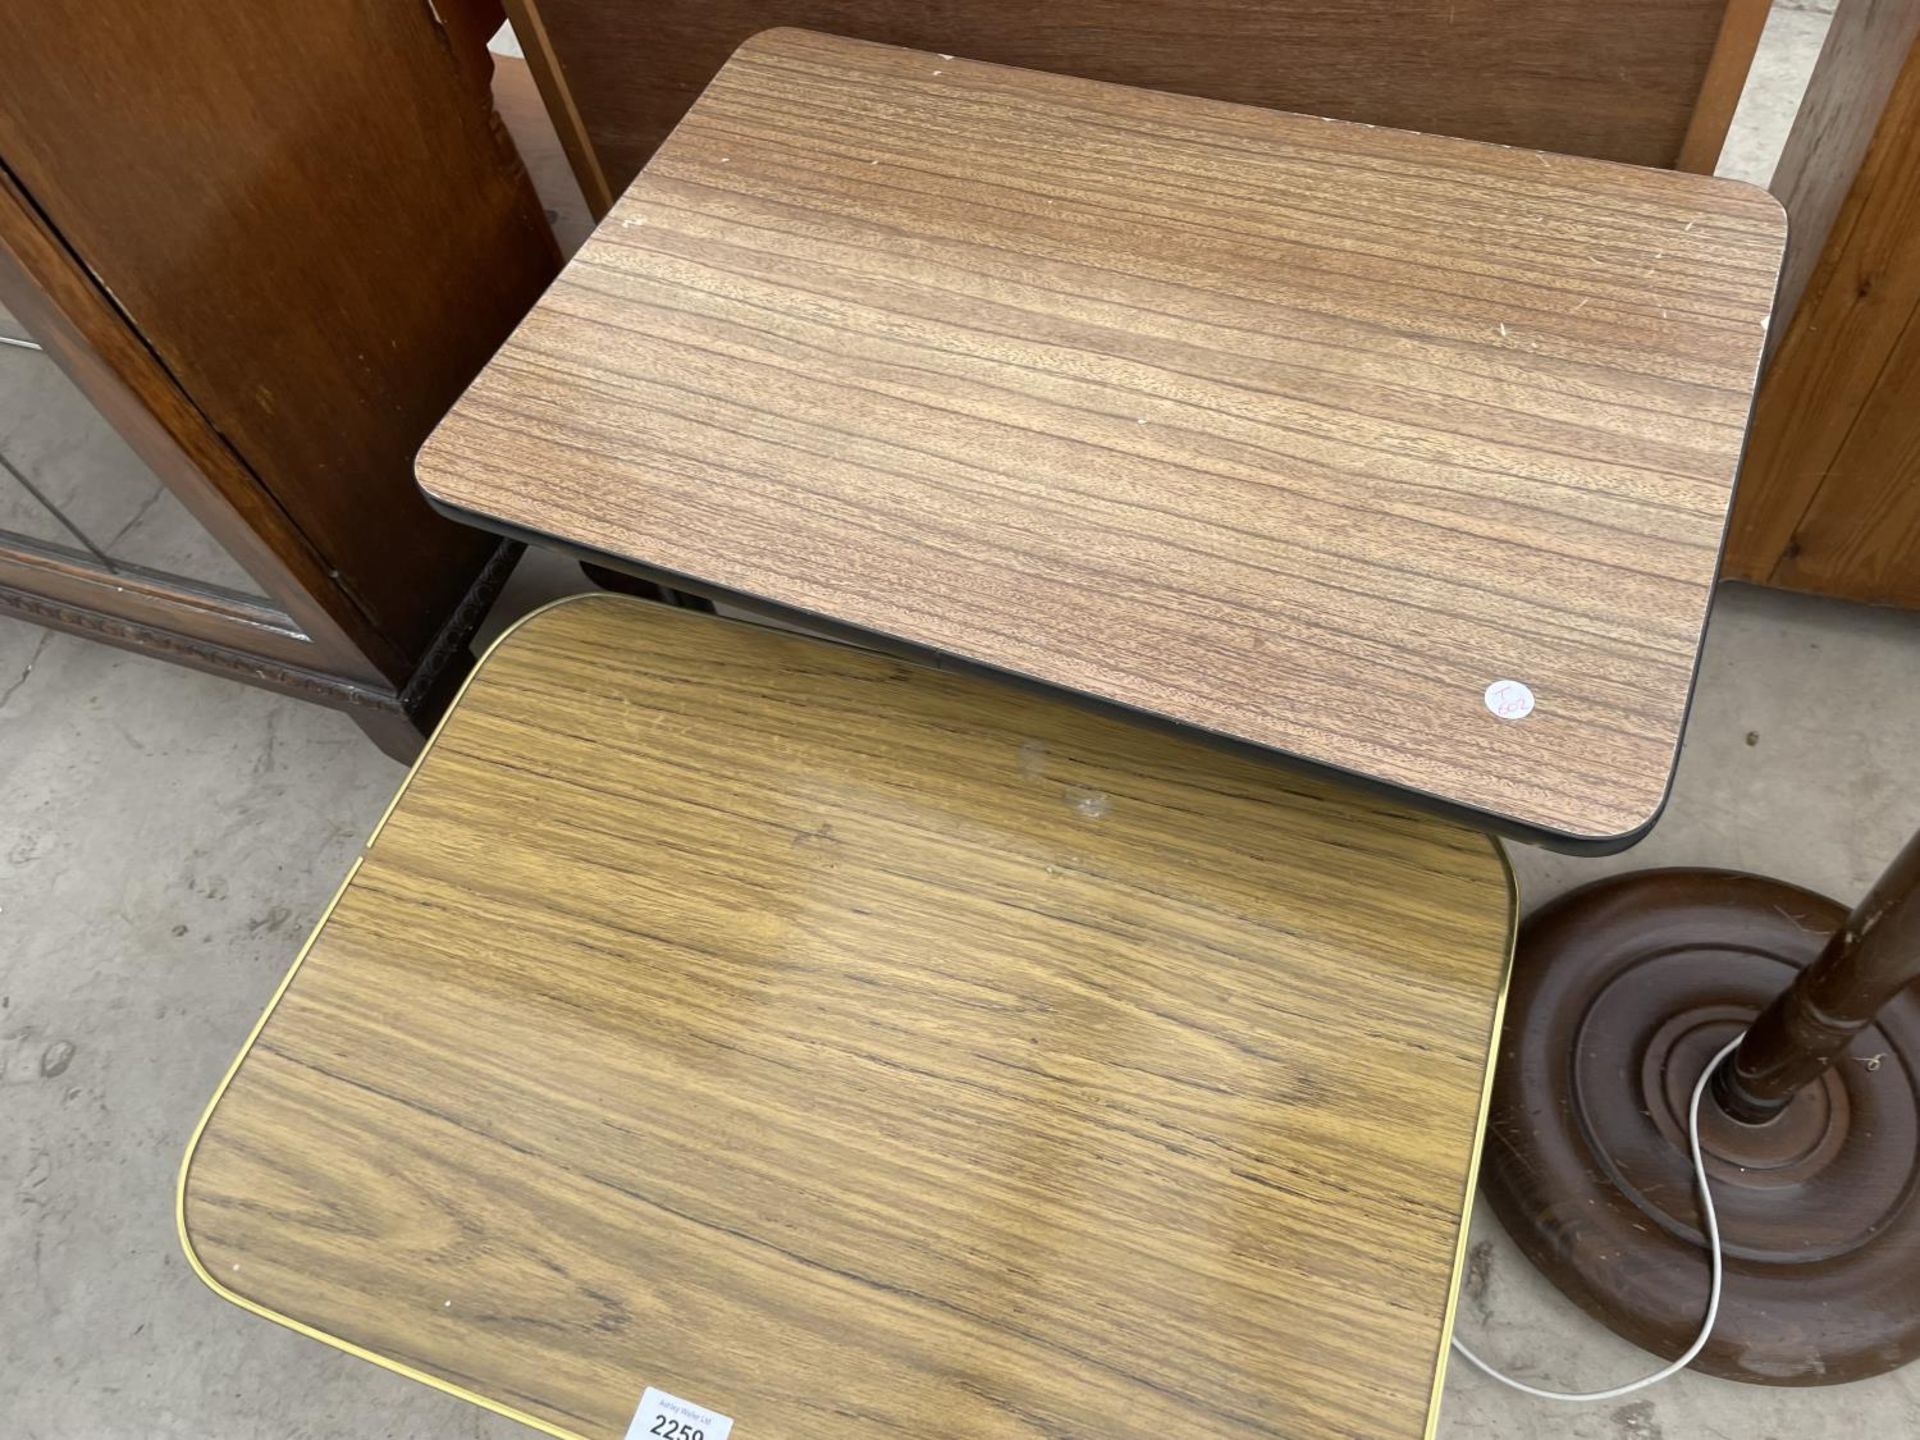 TWO MID 20TH CENTURY OCCASIONAL TABLES WITH FORMICA TOPS - Image 2 of 3